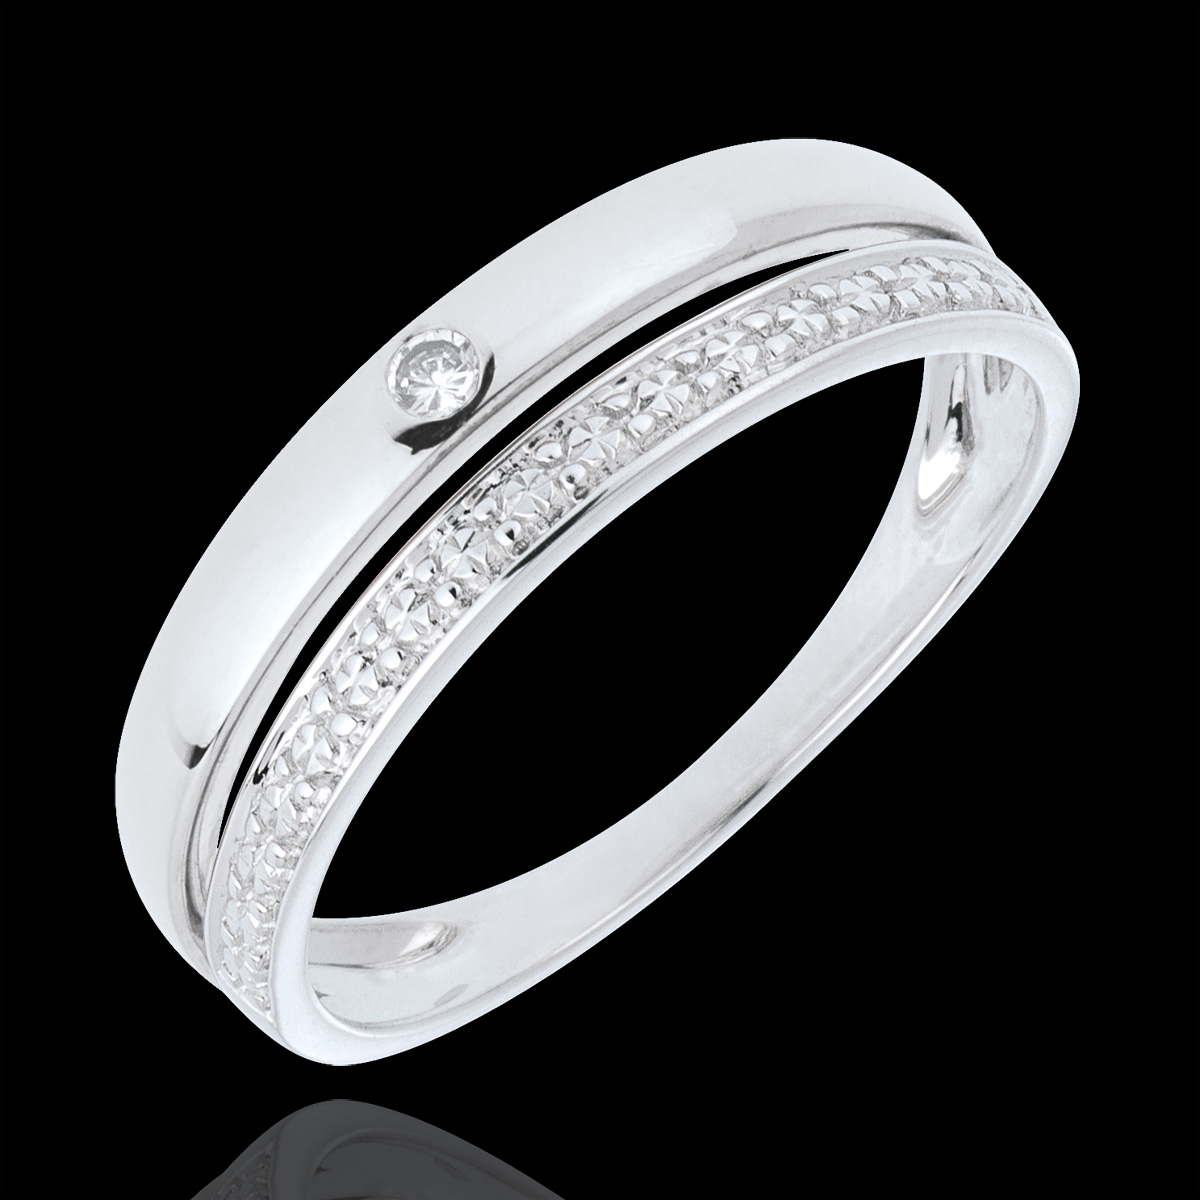 Pretty Wedding Ring - White gold - 9 carats : Edenly jewelery